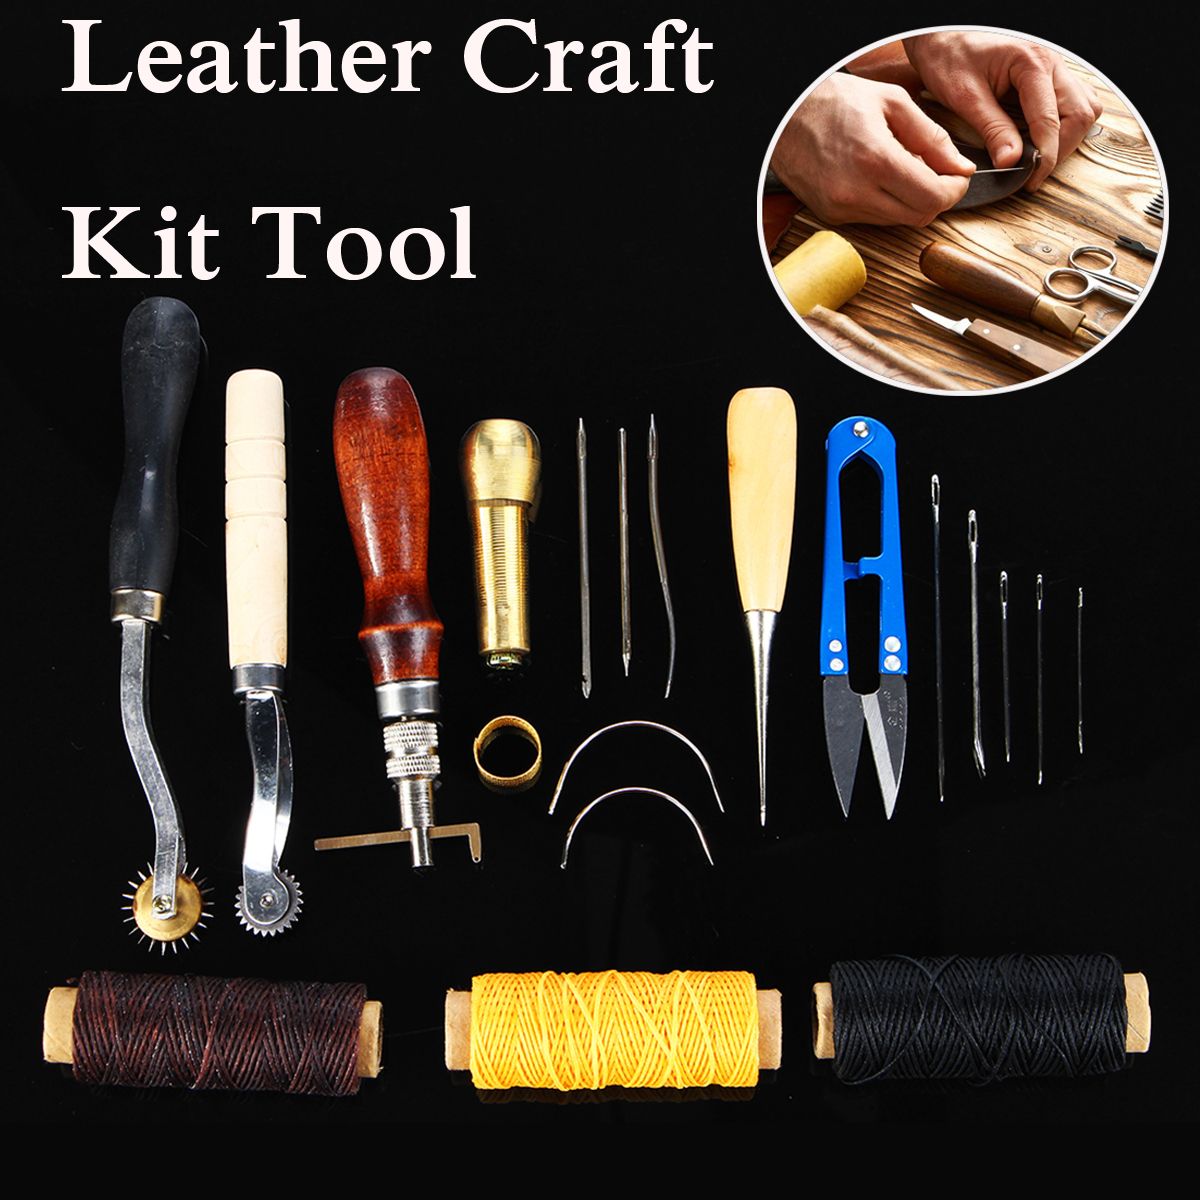 12Pcs-Leather-Craft-Hand-Stitching-Sewing-Tool-Leather-Hand-Sewing-Tool-Set-1251604